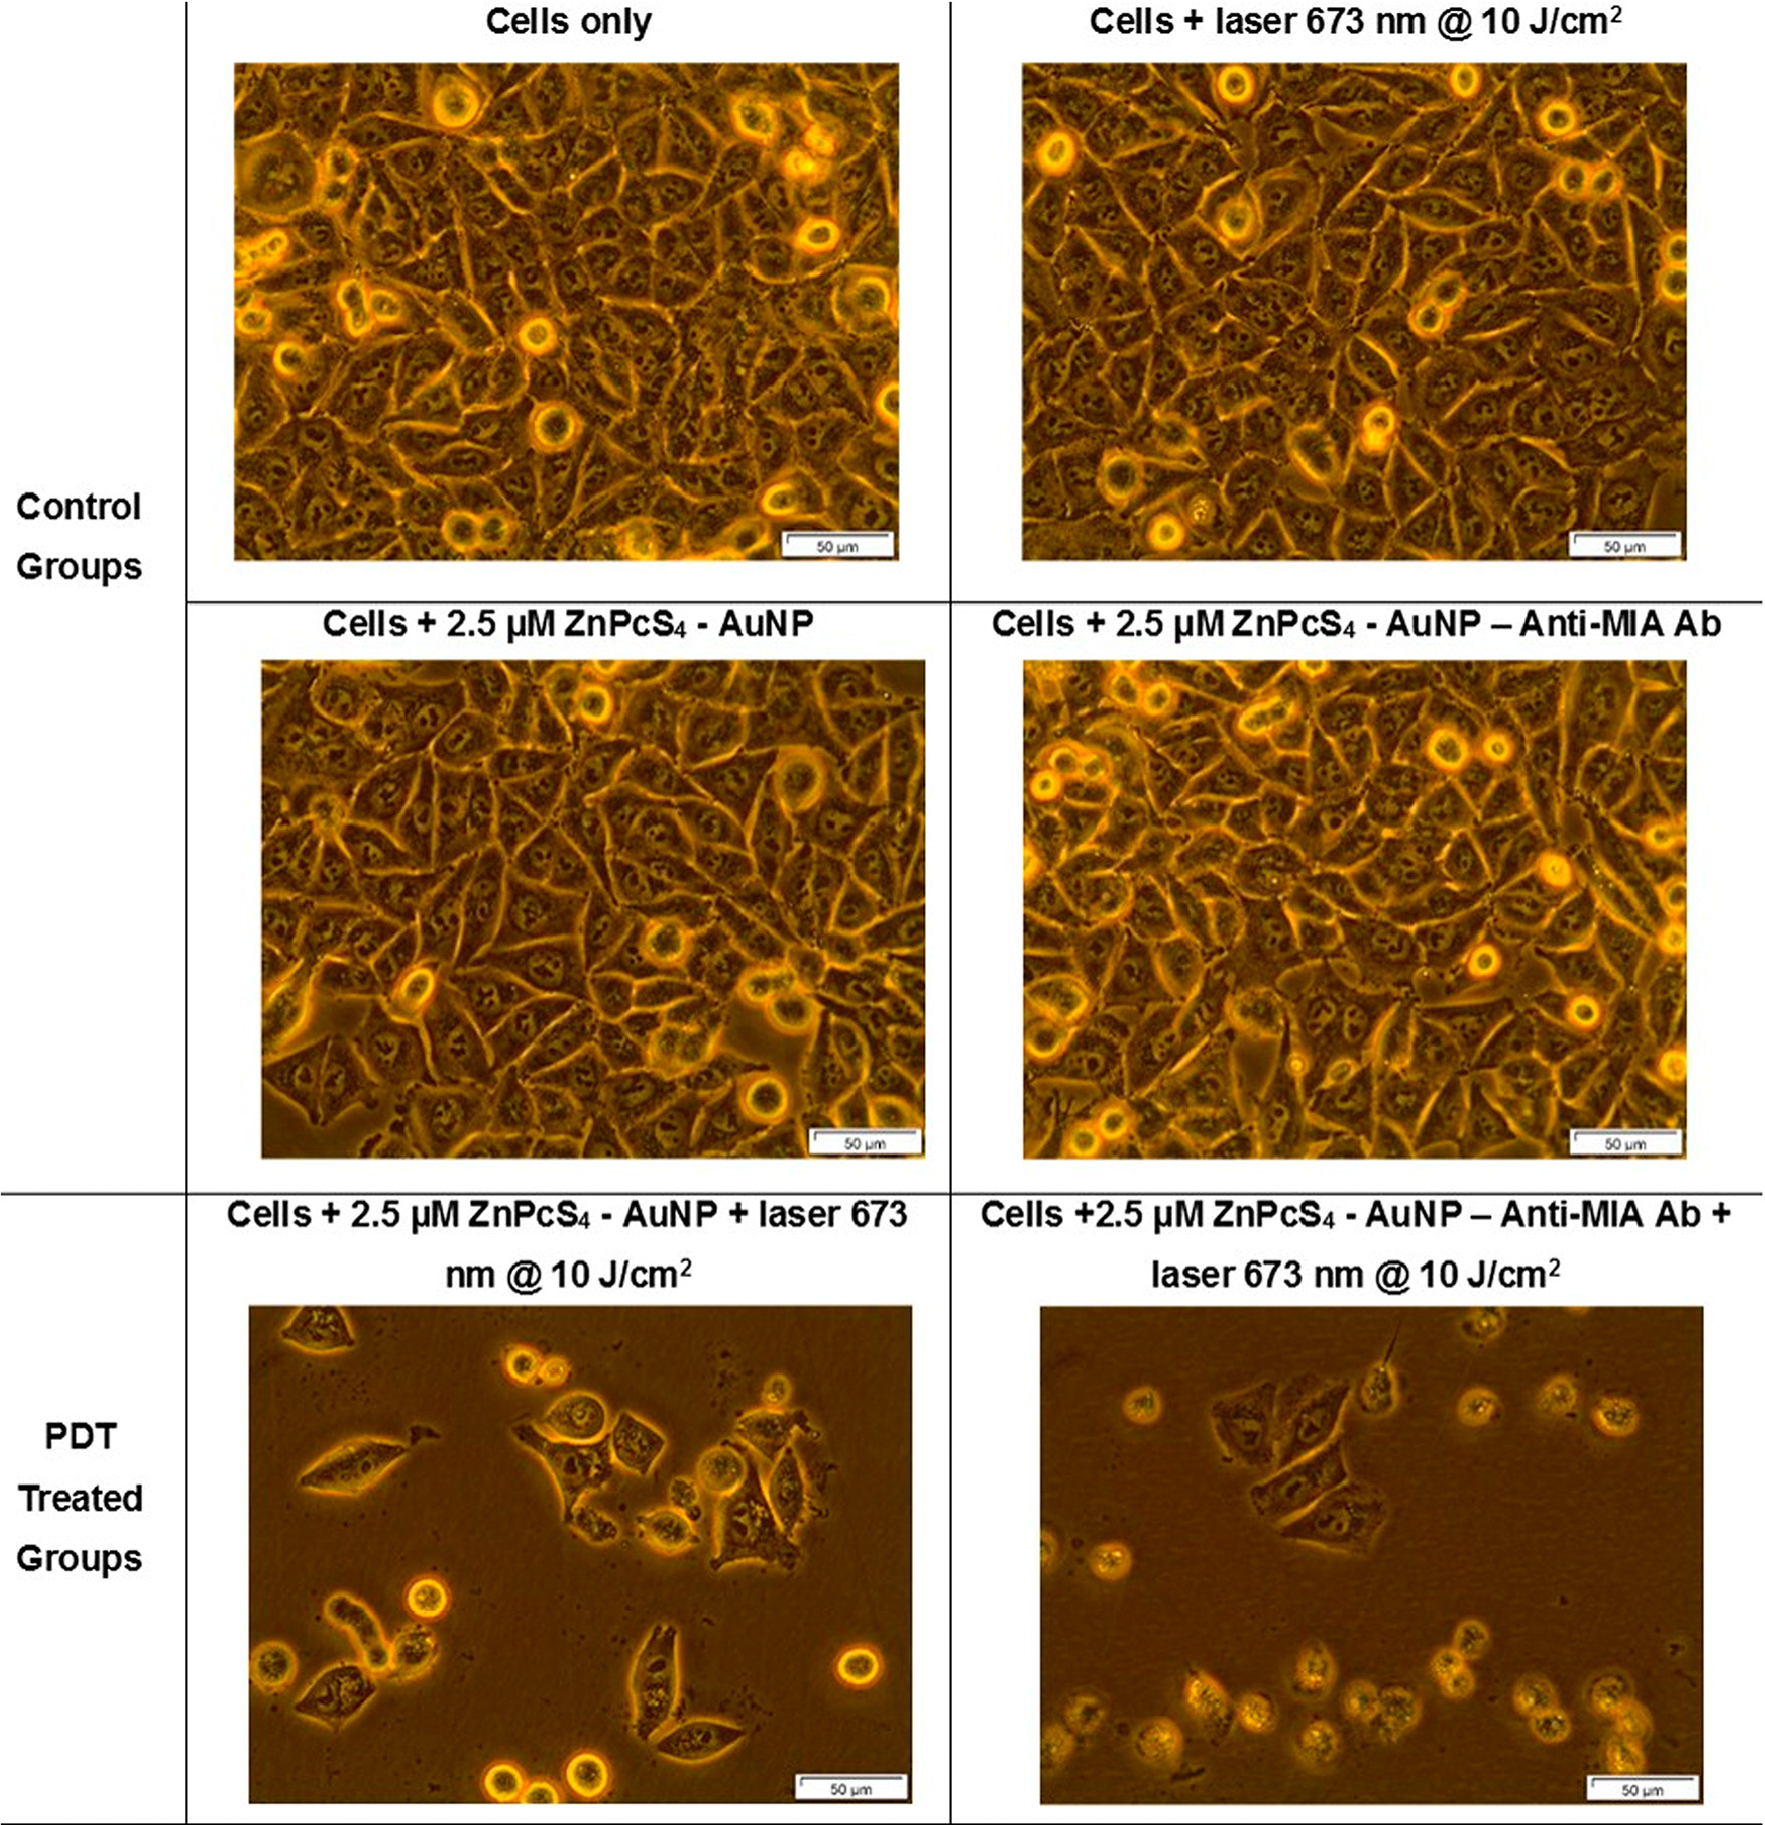 Light microscopy morphological images of MM cells at 400× magnification of control and experimental groups that were subjected to laser irradiation at a wavelength of 673 nm and a fluence of 10 J/cm2 during final PS drug conjugate PDT response assays.